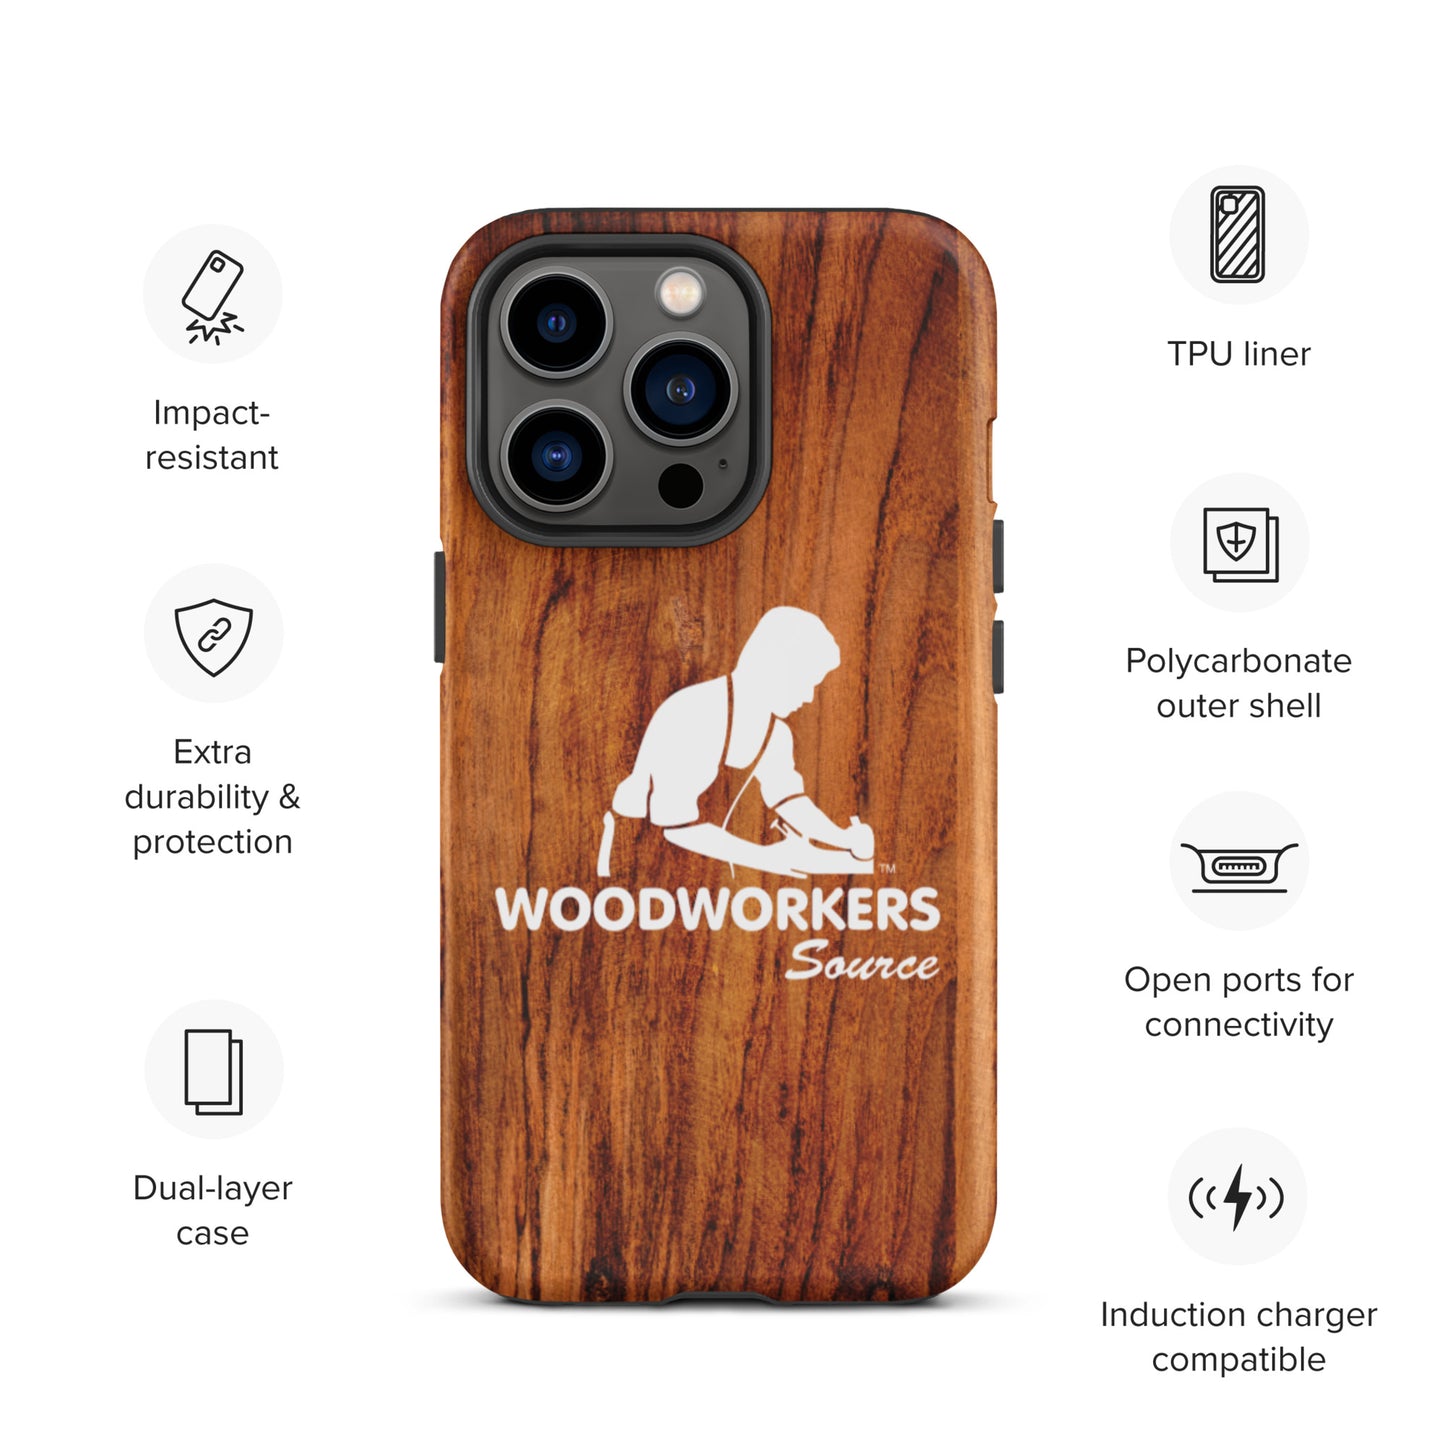 Woodworkers Source Tough iPhone case